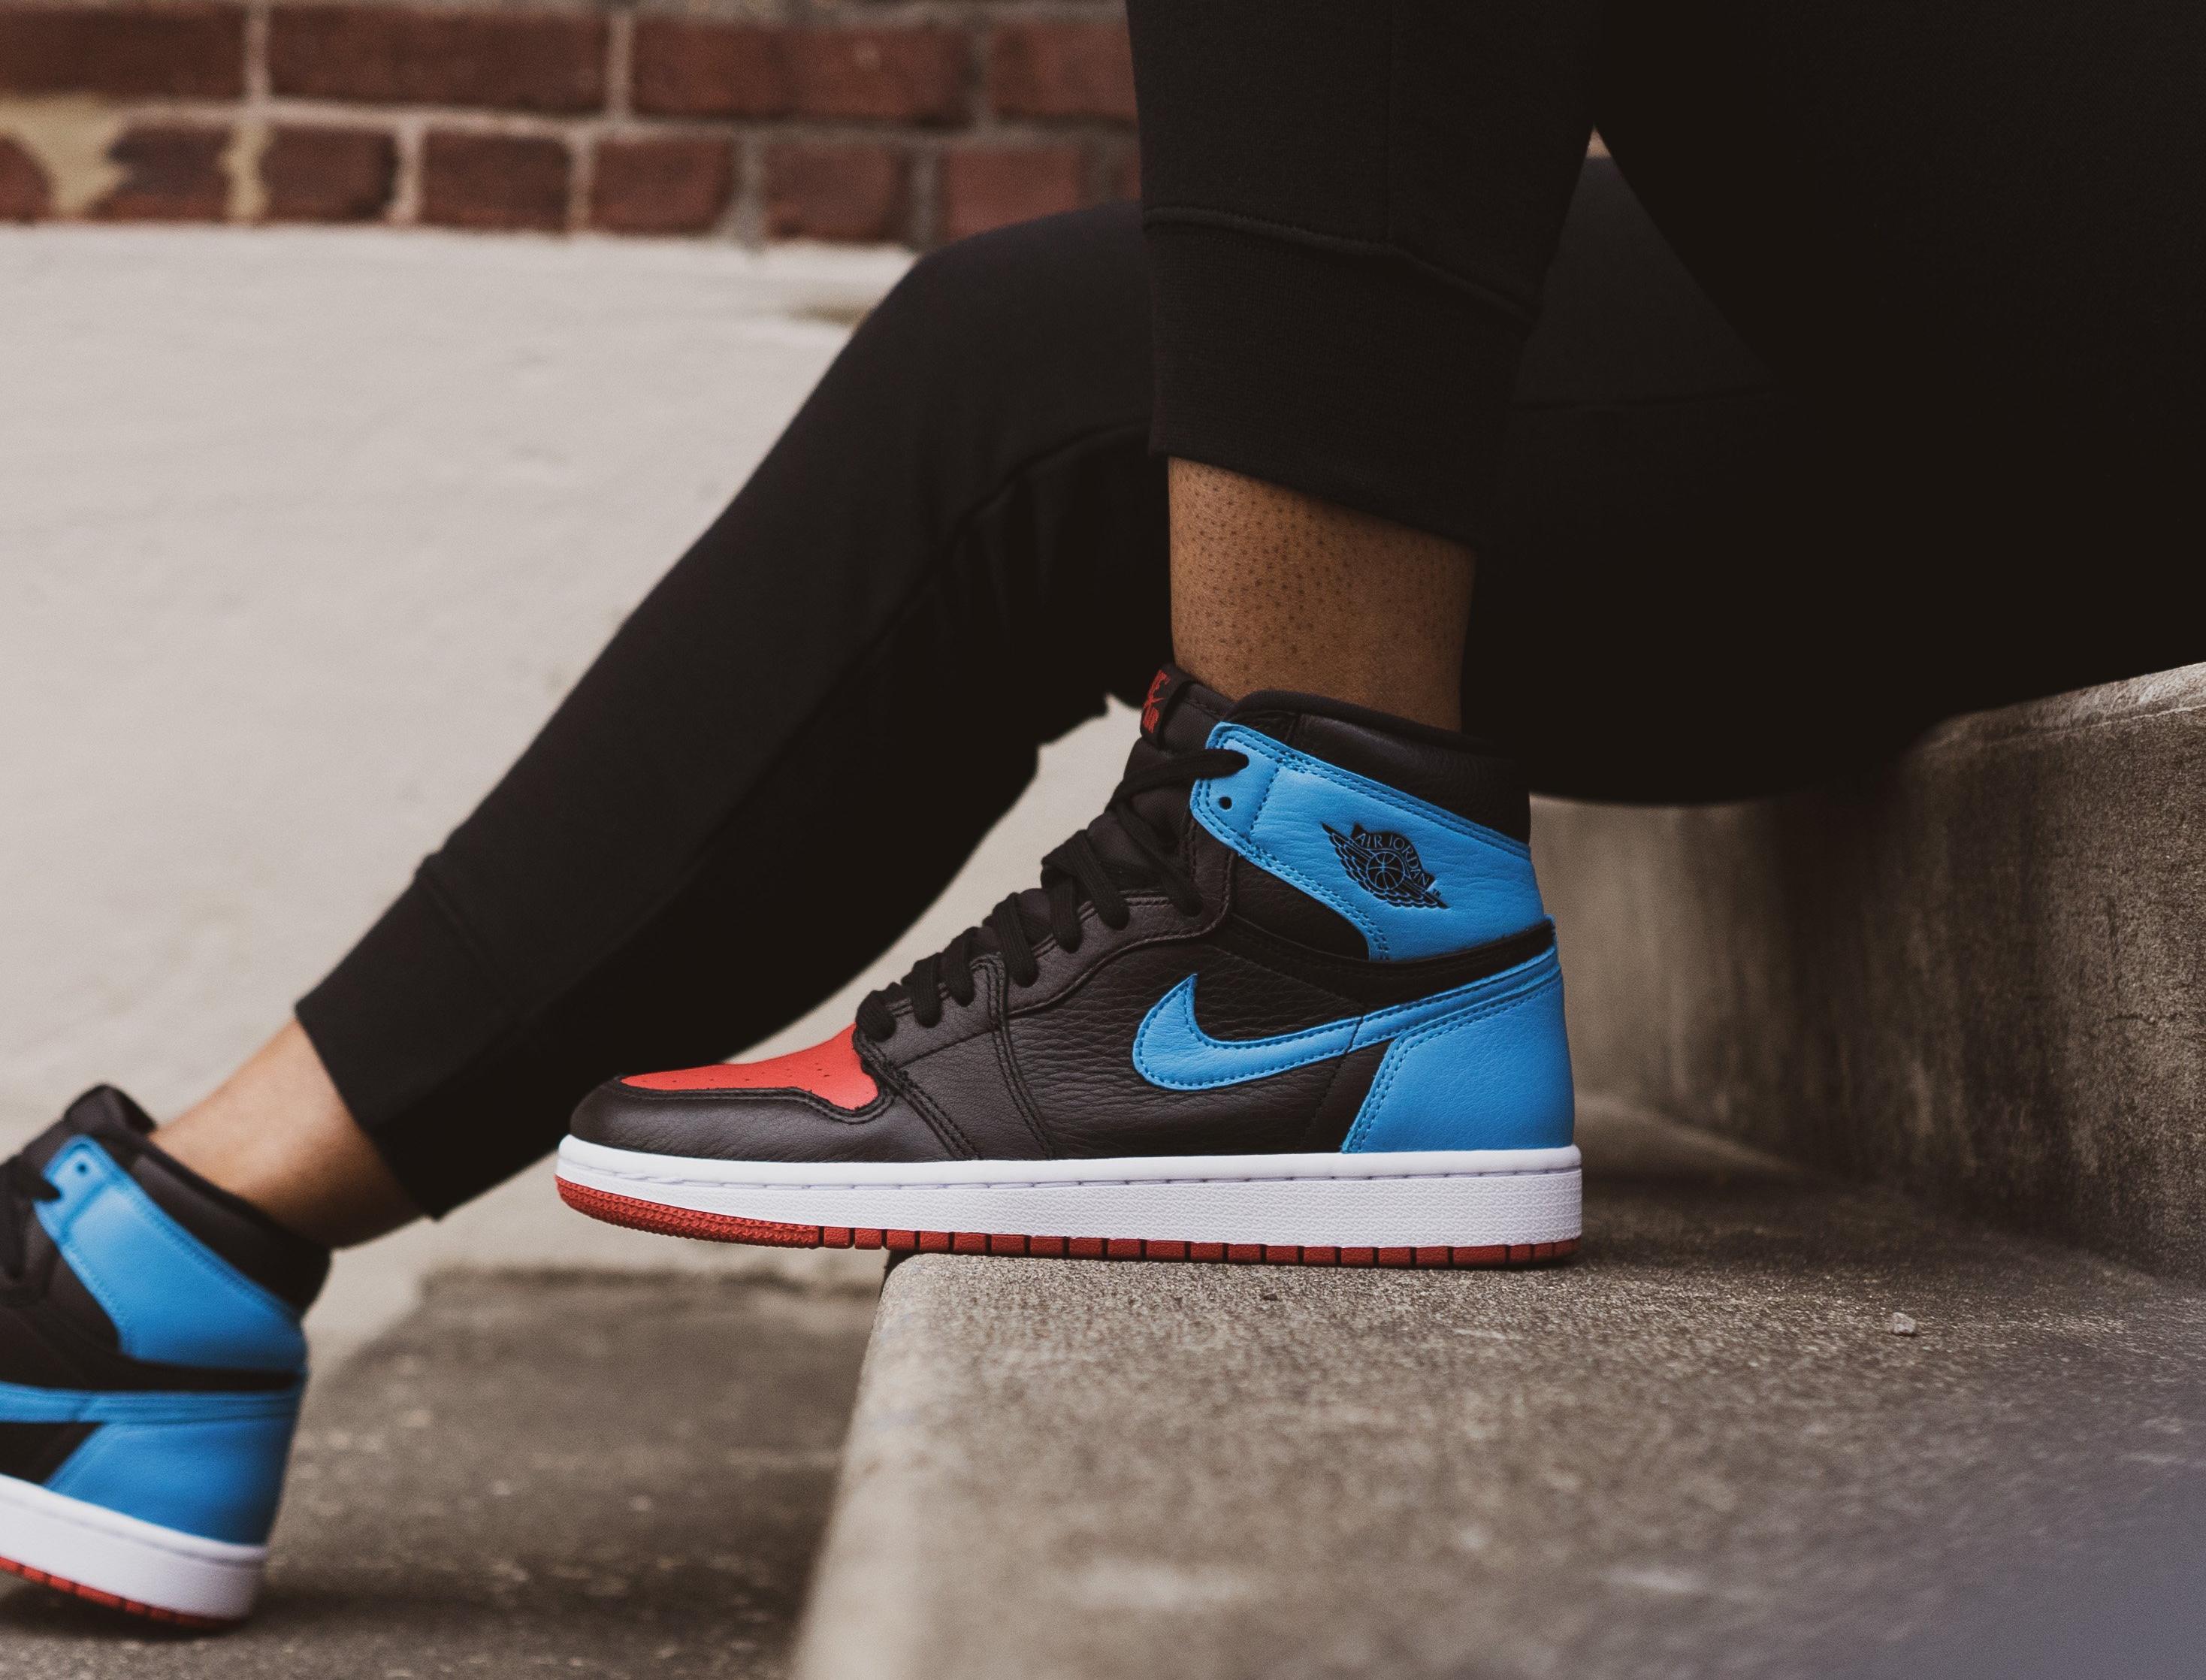 Sneakers Release Air Jordan 1 High Og Unc To Chicago Black Powder Blue Gym Red Women S And Kids Basketball Shoe